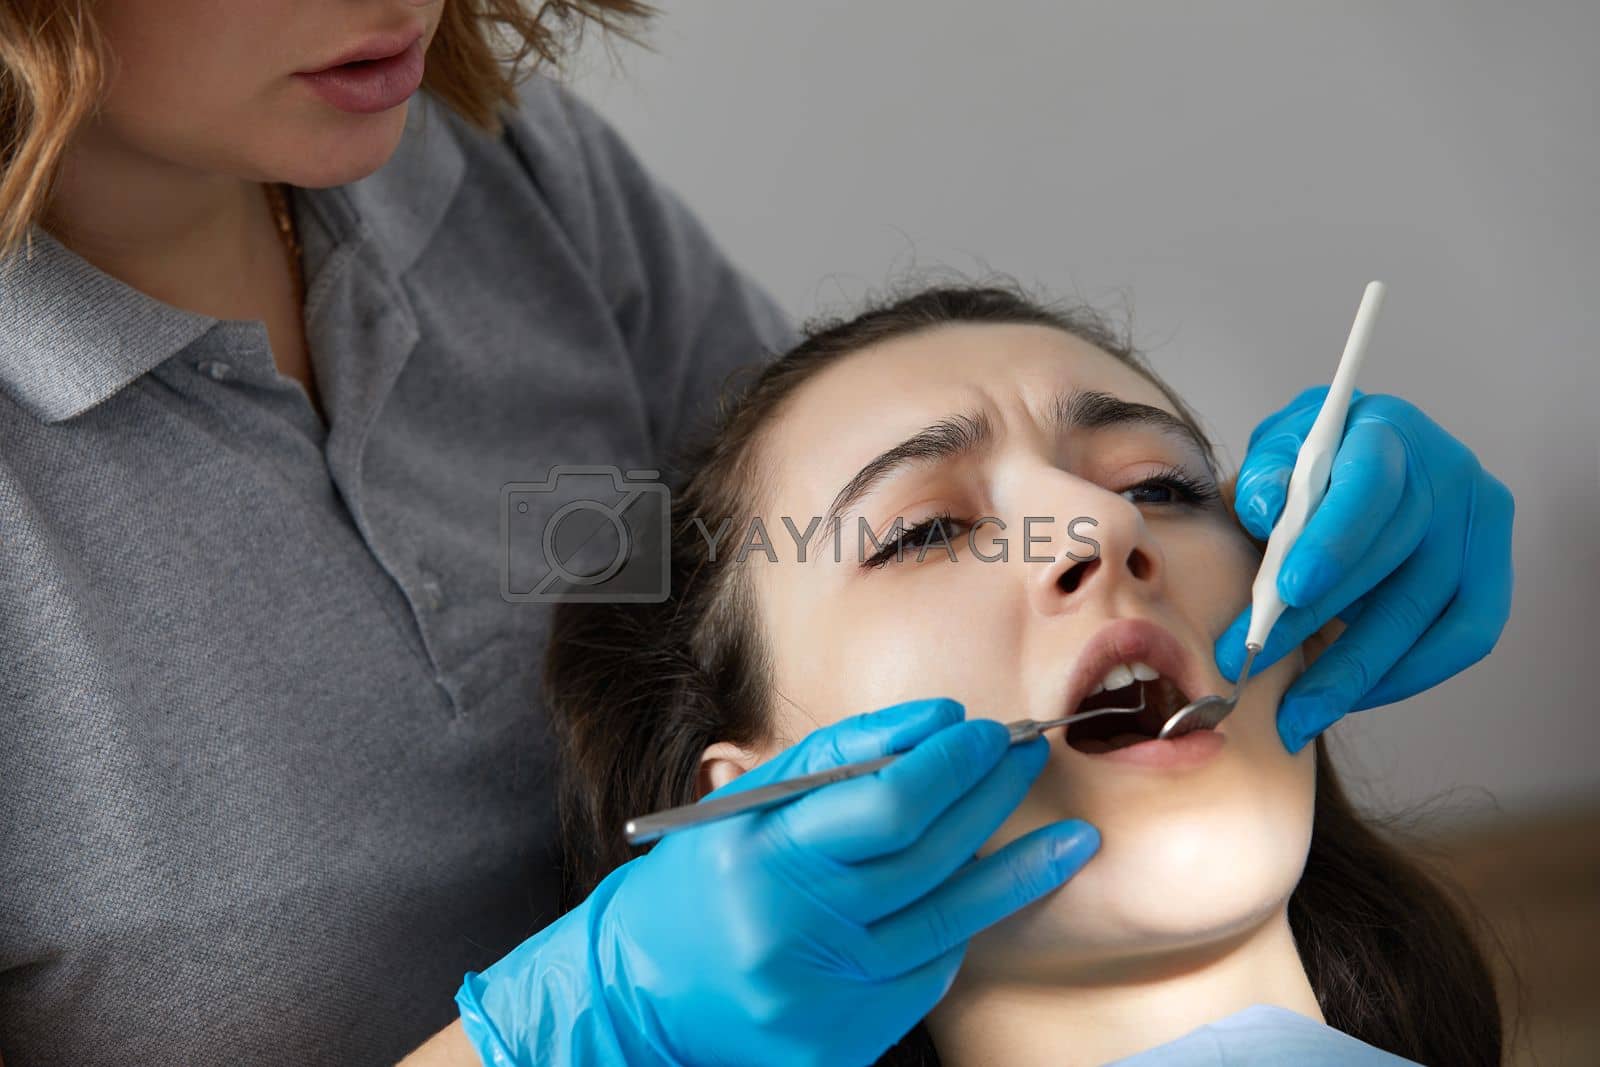 Royalty free image of Dentist checking teeth of a female patient with dental mirror by Mariakray